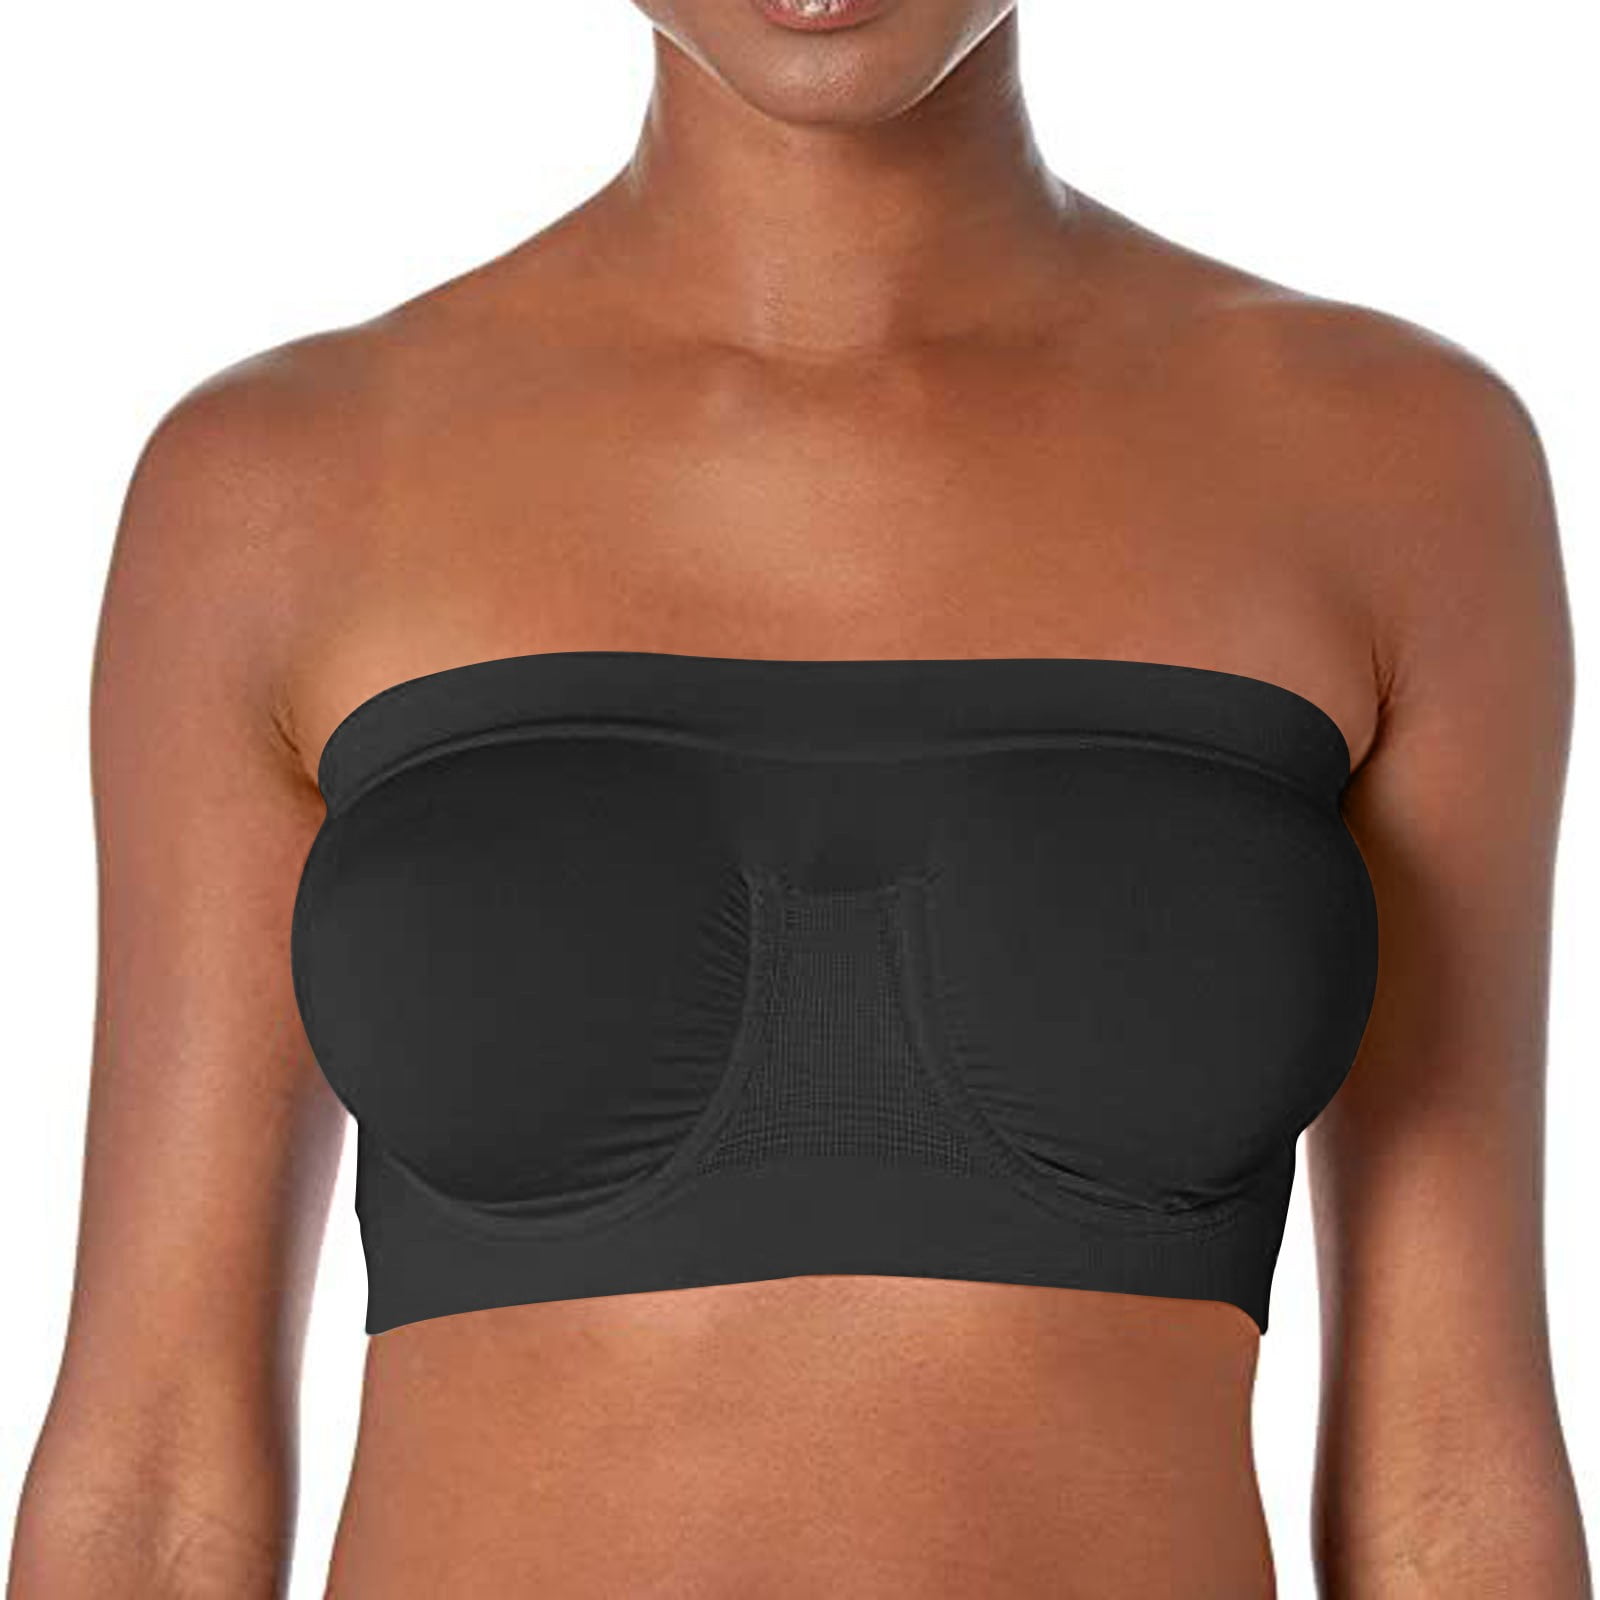 Qcmgmg Strapless Bras for Women Seamless Bandeaus Comfort T